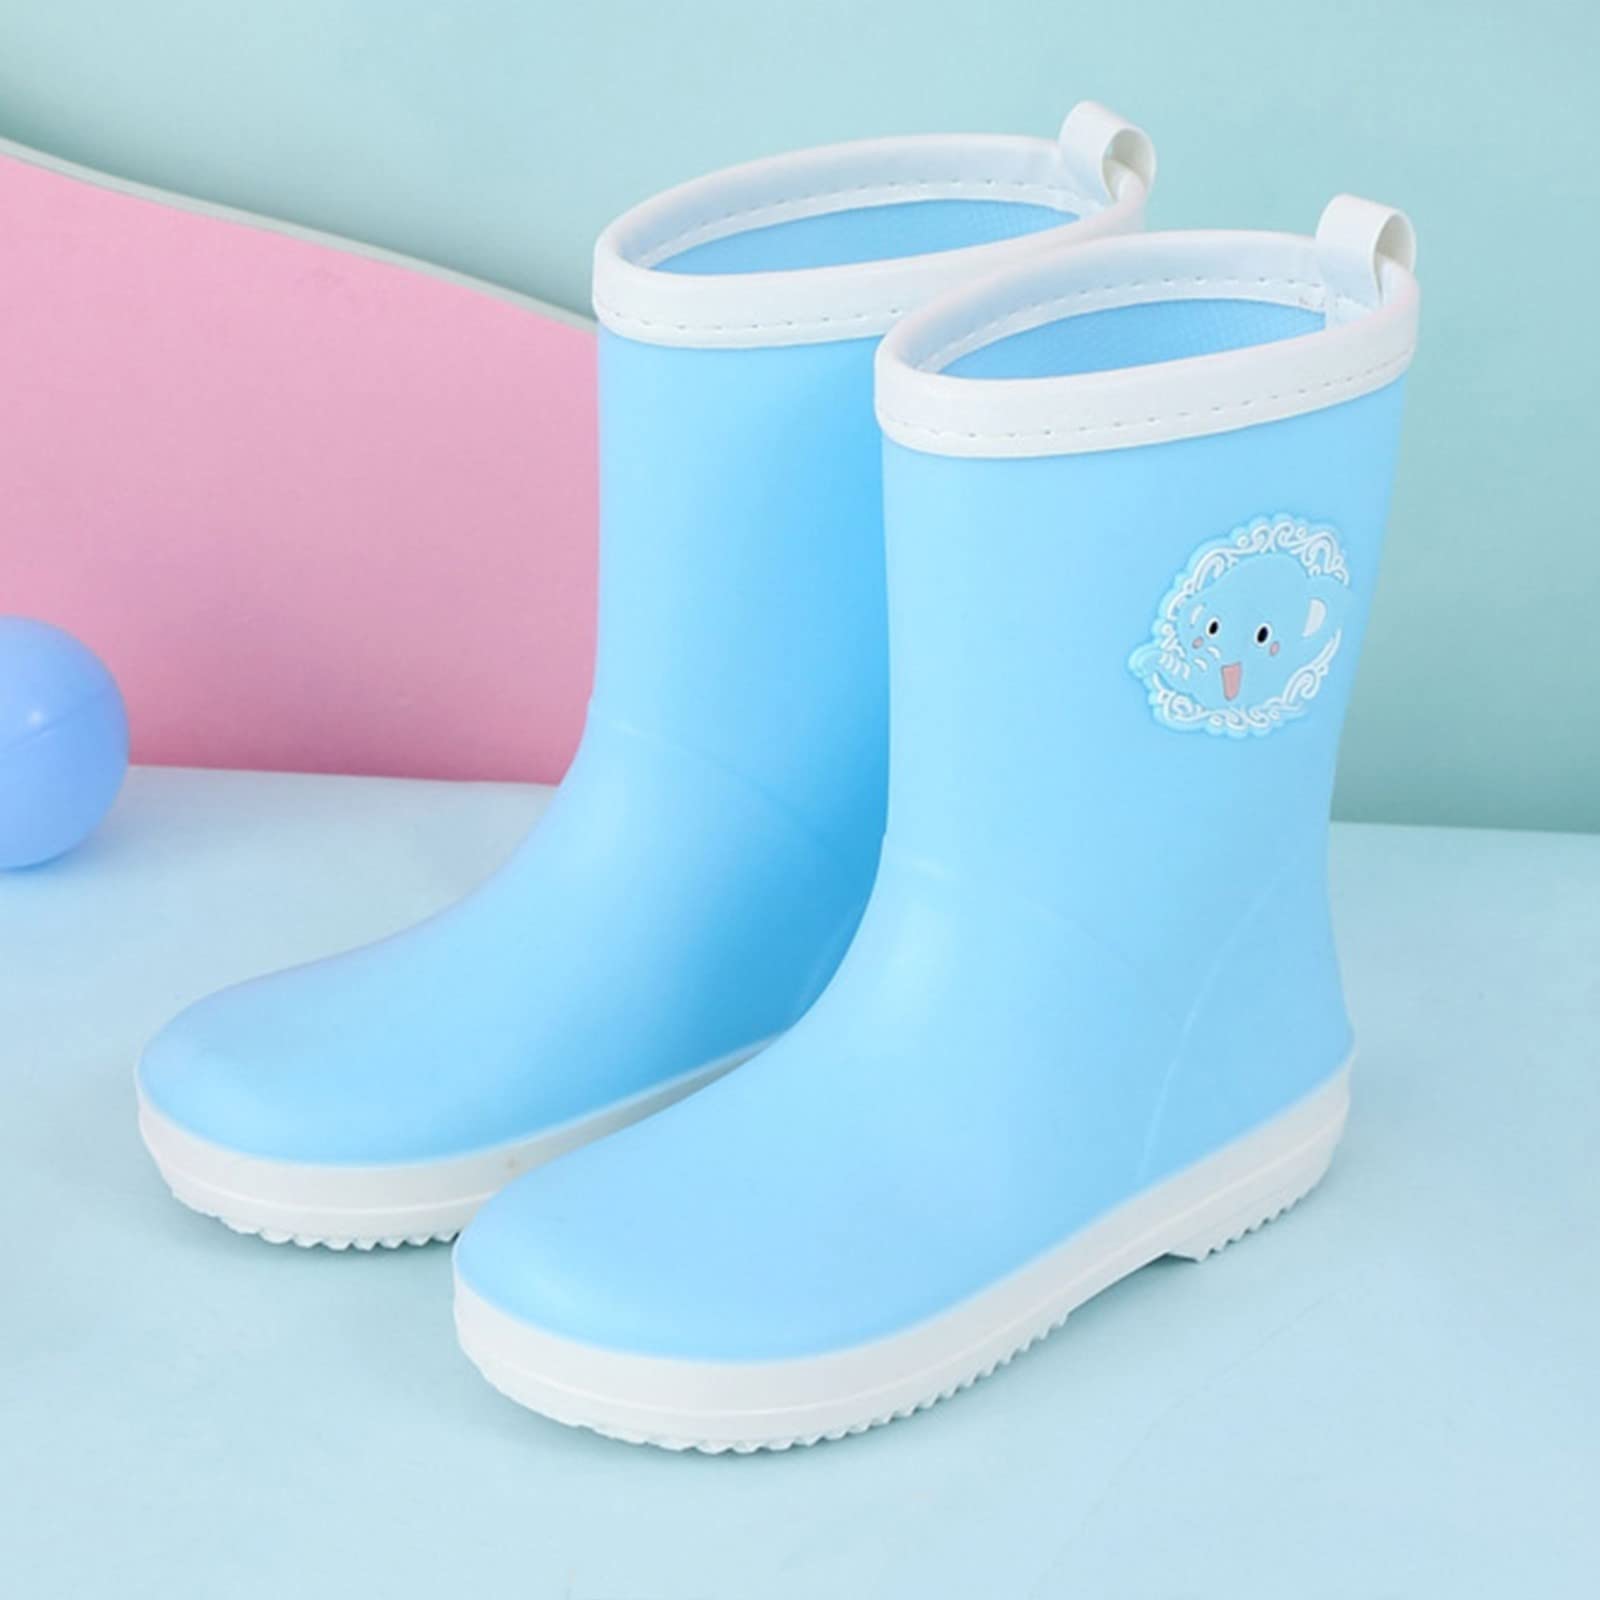 TODOZO Blue Elephant Cartoon Character Rain Shoes Children's Rain Shoes Boys And Girls Water Shoes Baby Rain Boots 6 Months Old